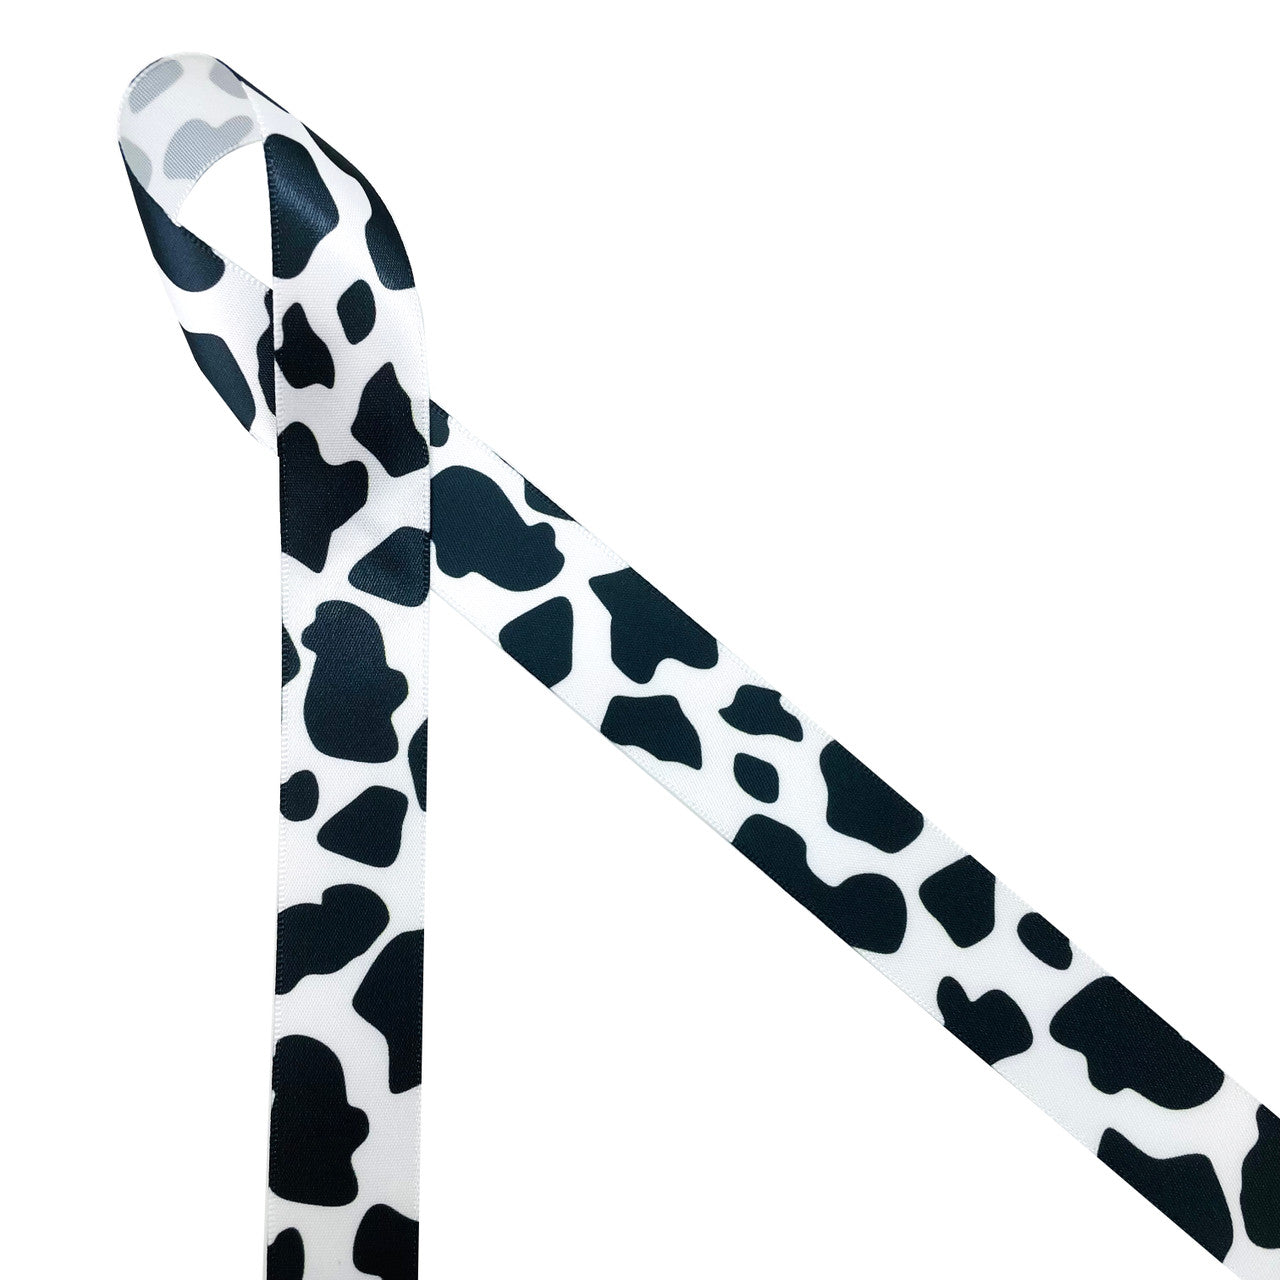 Cow print ribbon in black and white ideal for crafts, gift wrap, party  decor and sewing projects printed on 7/8 white satin, 10 yards